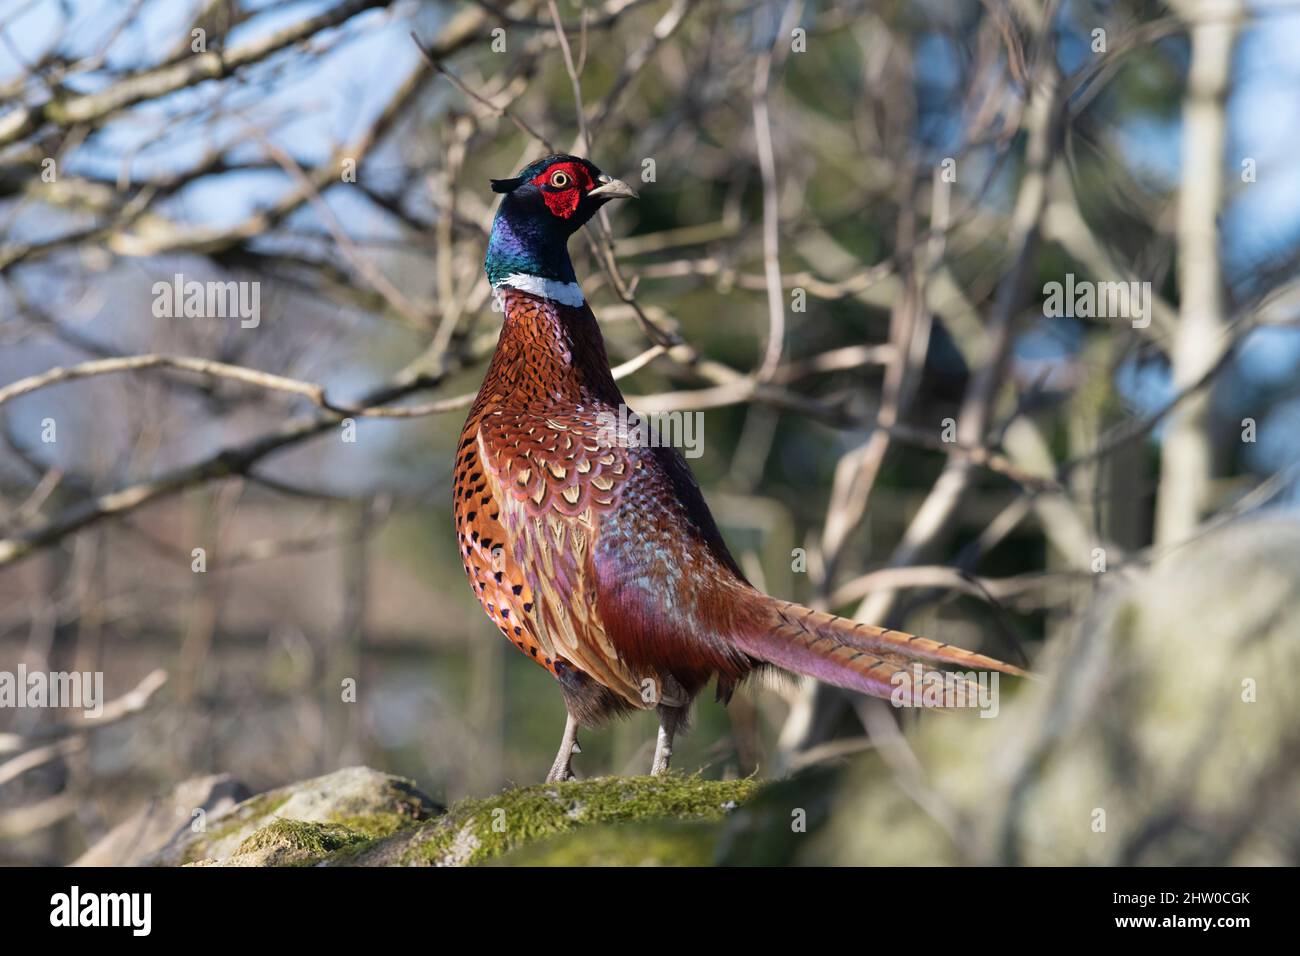 A Colourful Cock Pheasant (Phasianus Colchicus) Perched on a Moss-Covered Dry Stone Wall on a Sunny Winter Morning Stock Photo